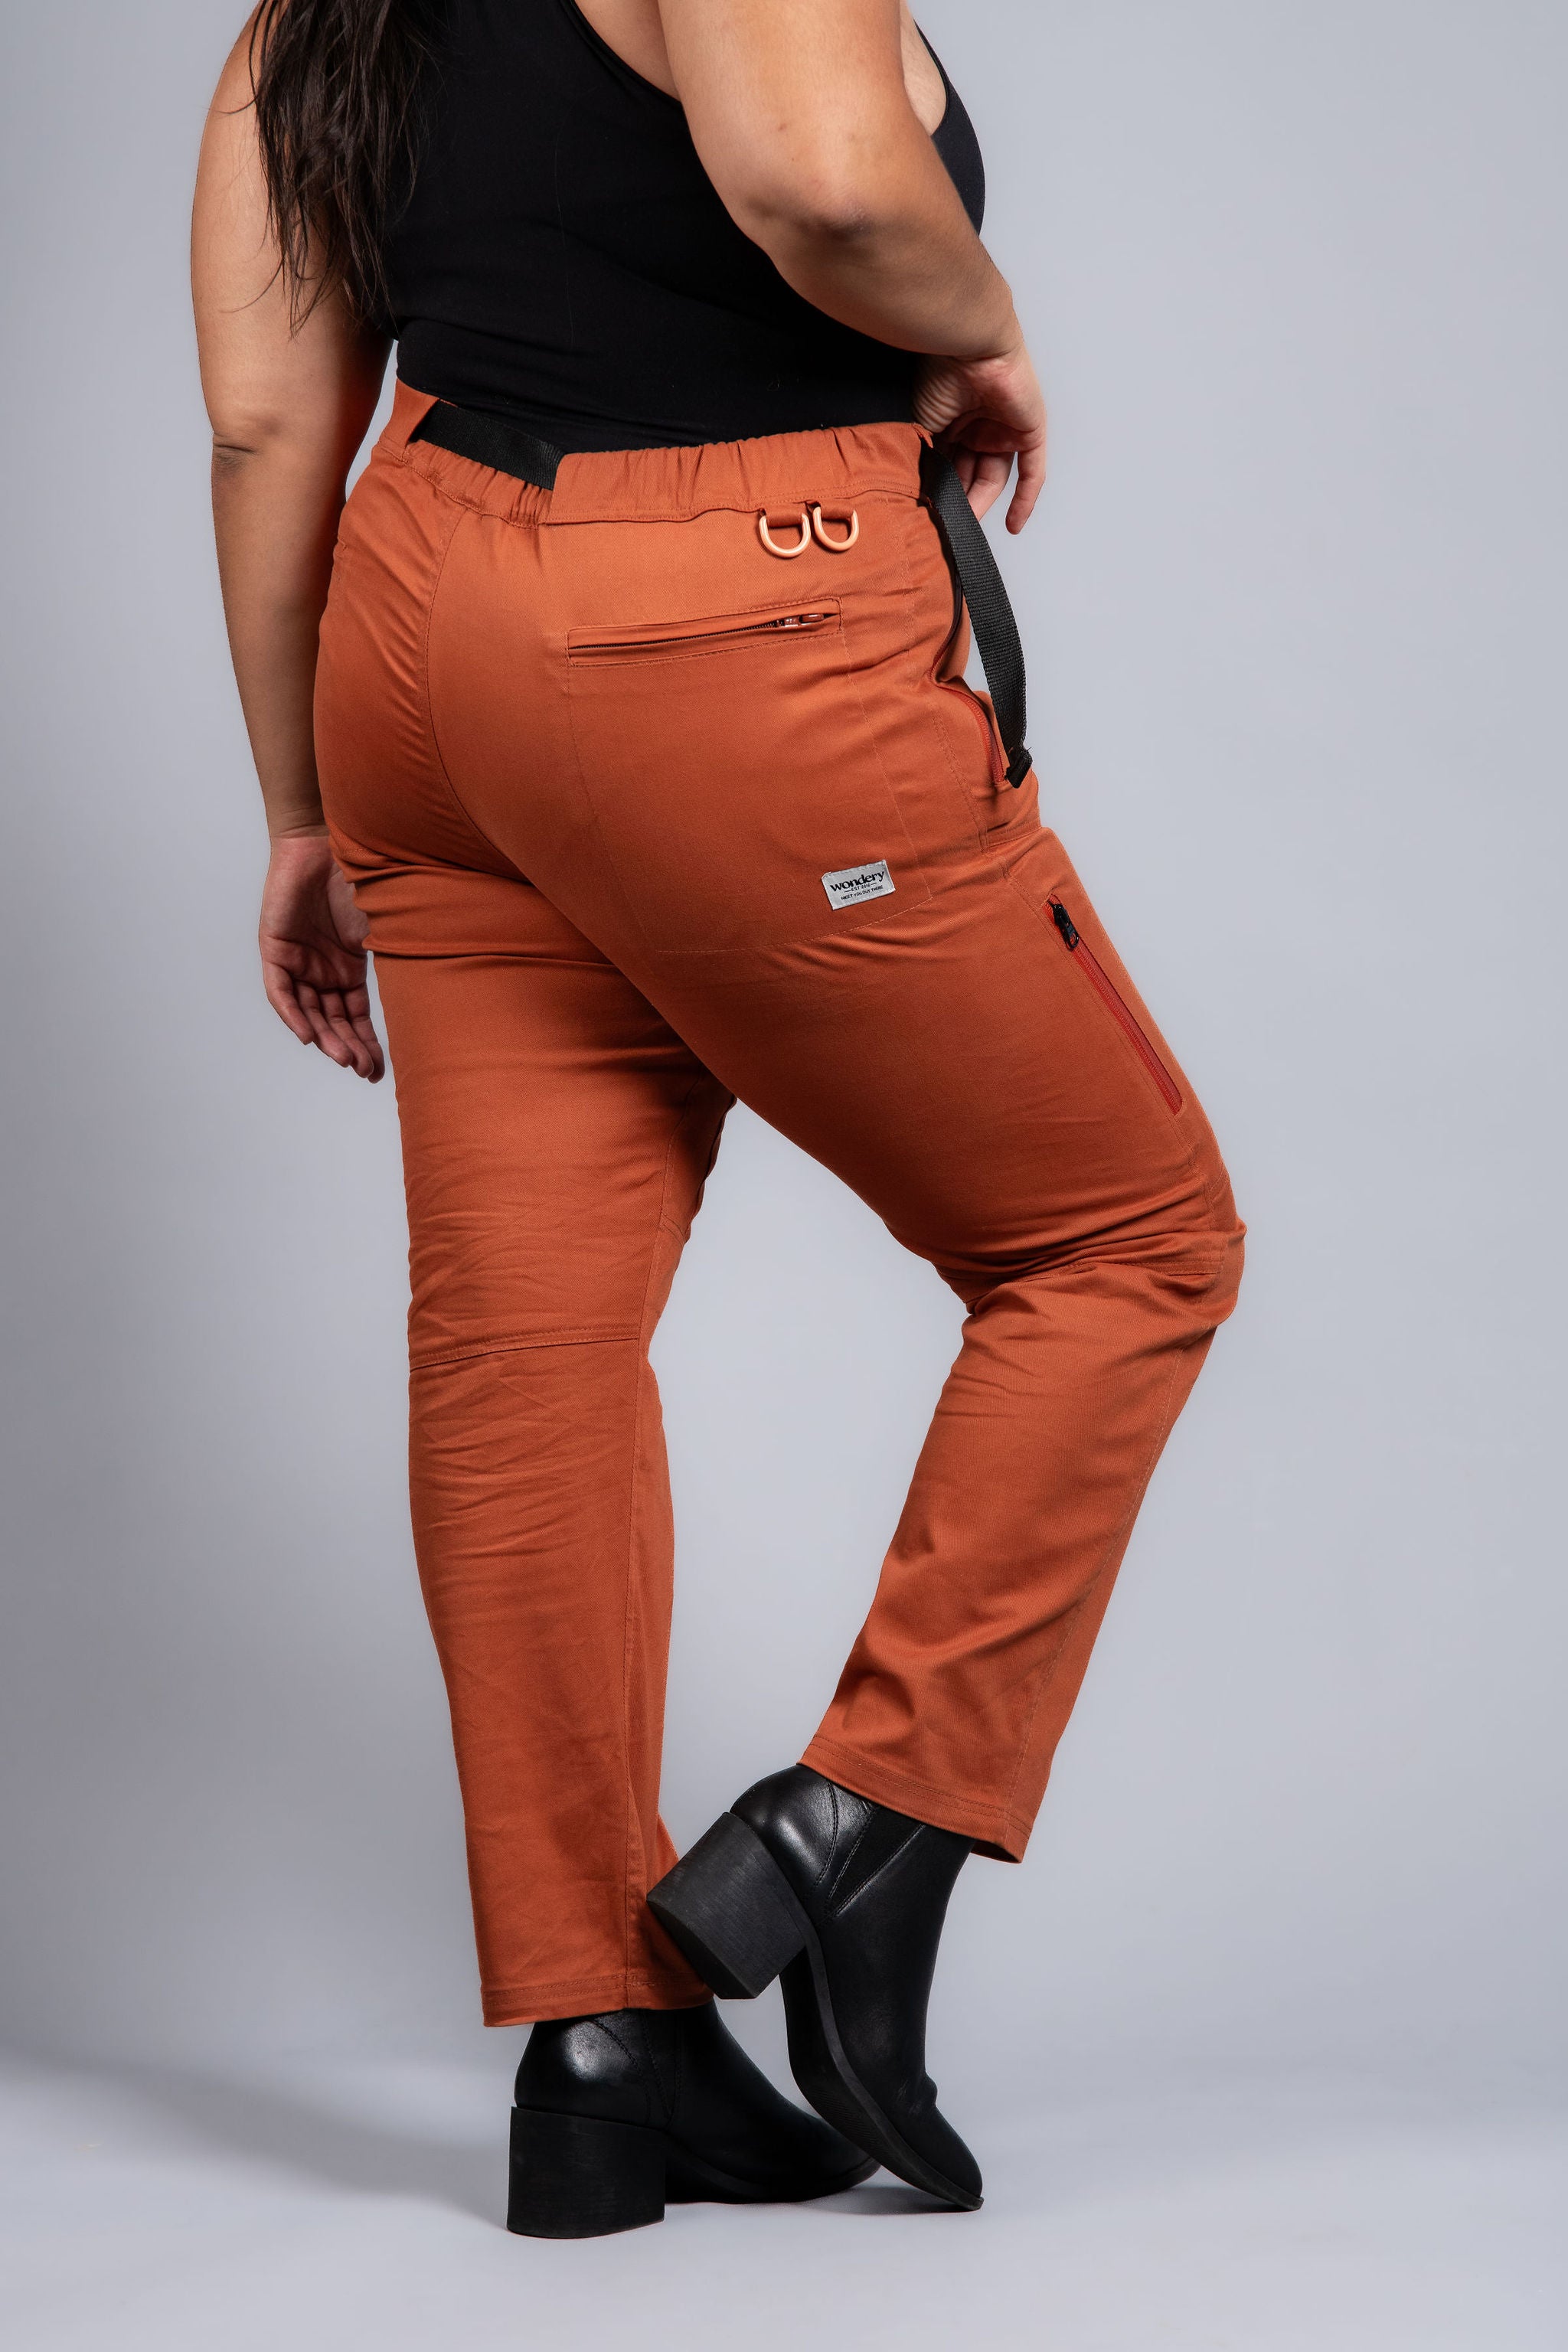 woman in adjustable orange hiking pants and tank top #color_red rocks